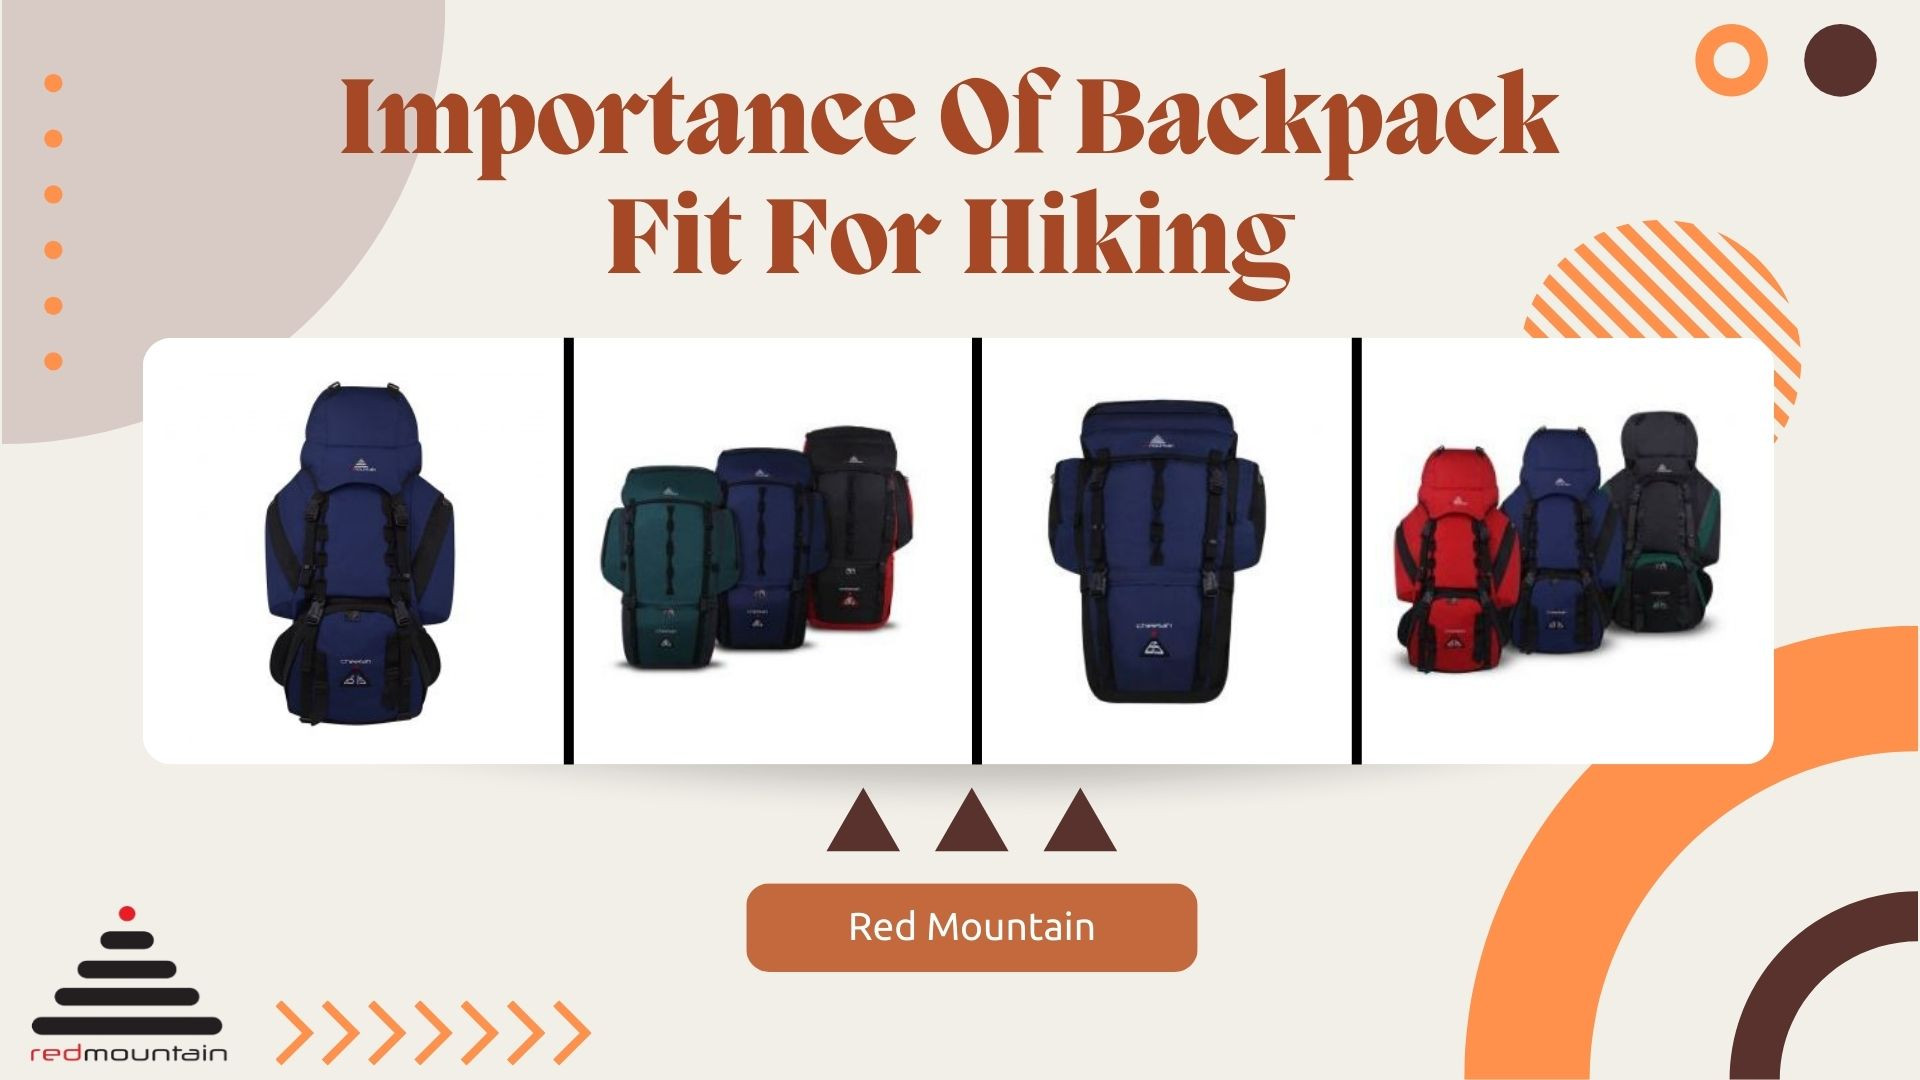 The Importance of a Backpack, Fit for Hiking